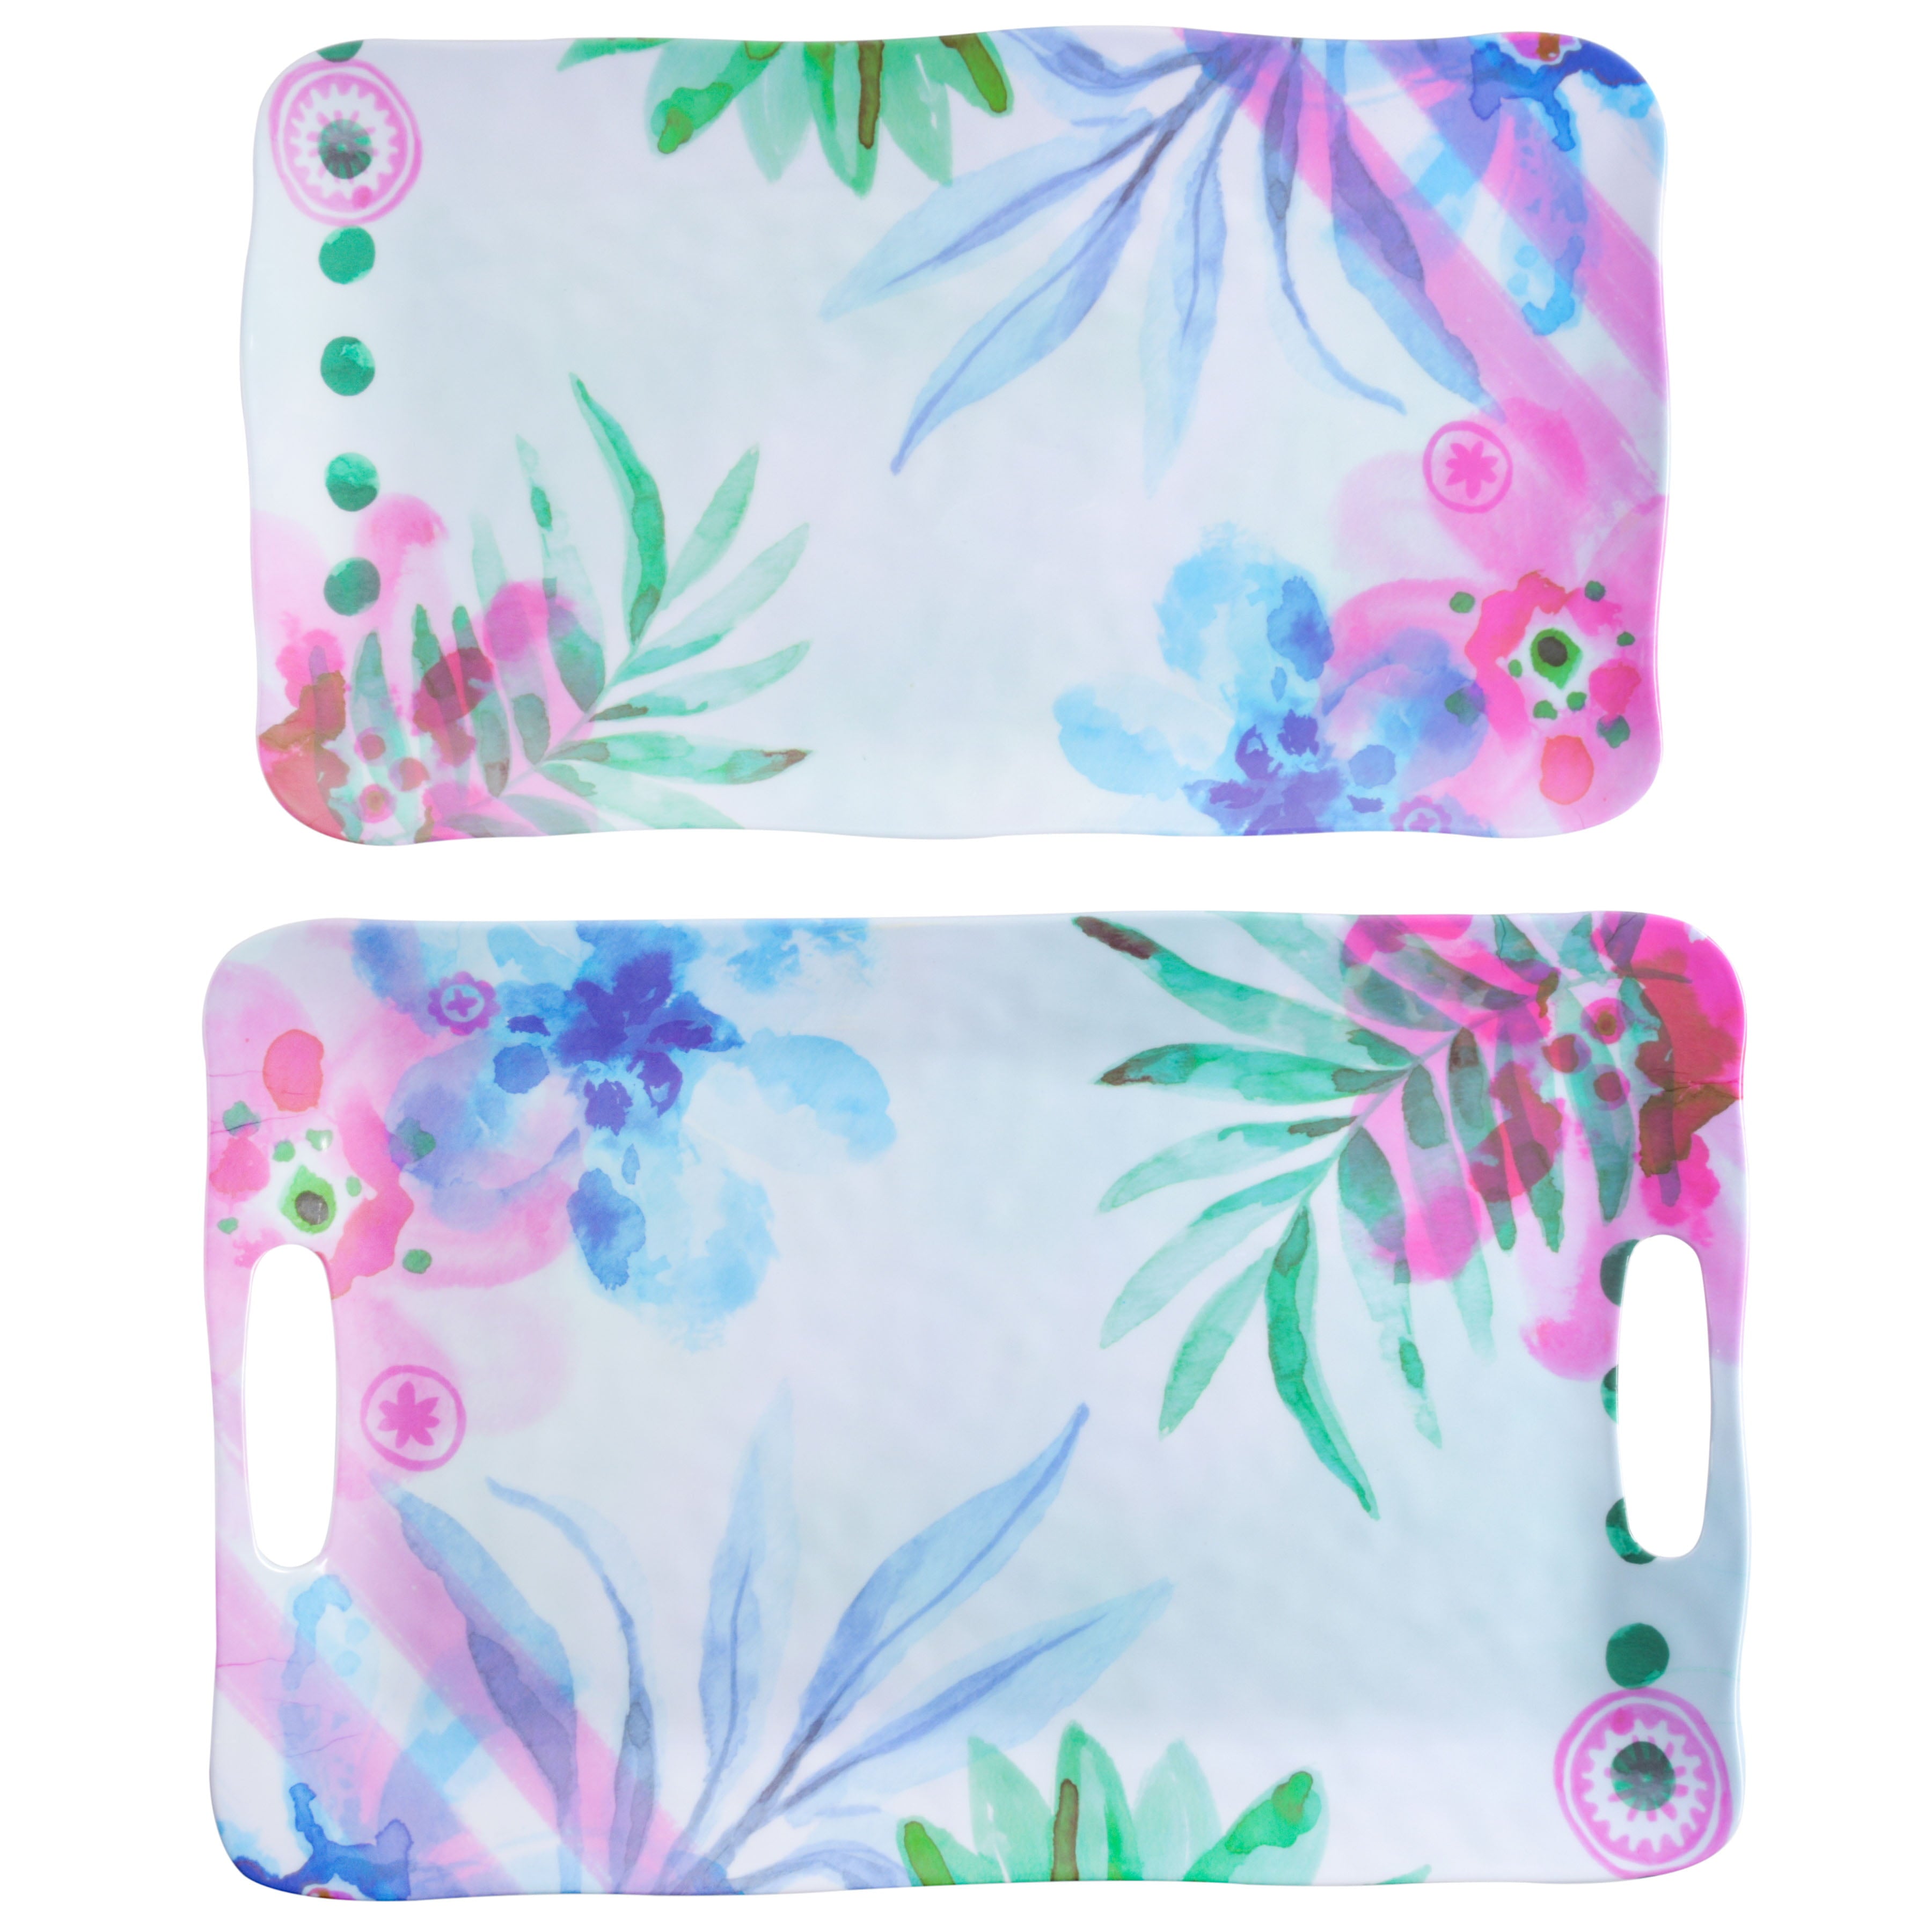 Spice by Tia Mowry 2 Piece Decorated Melamine Serving Trays